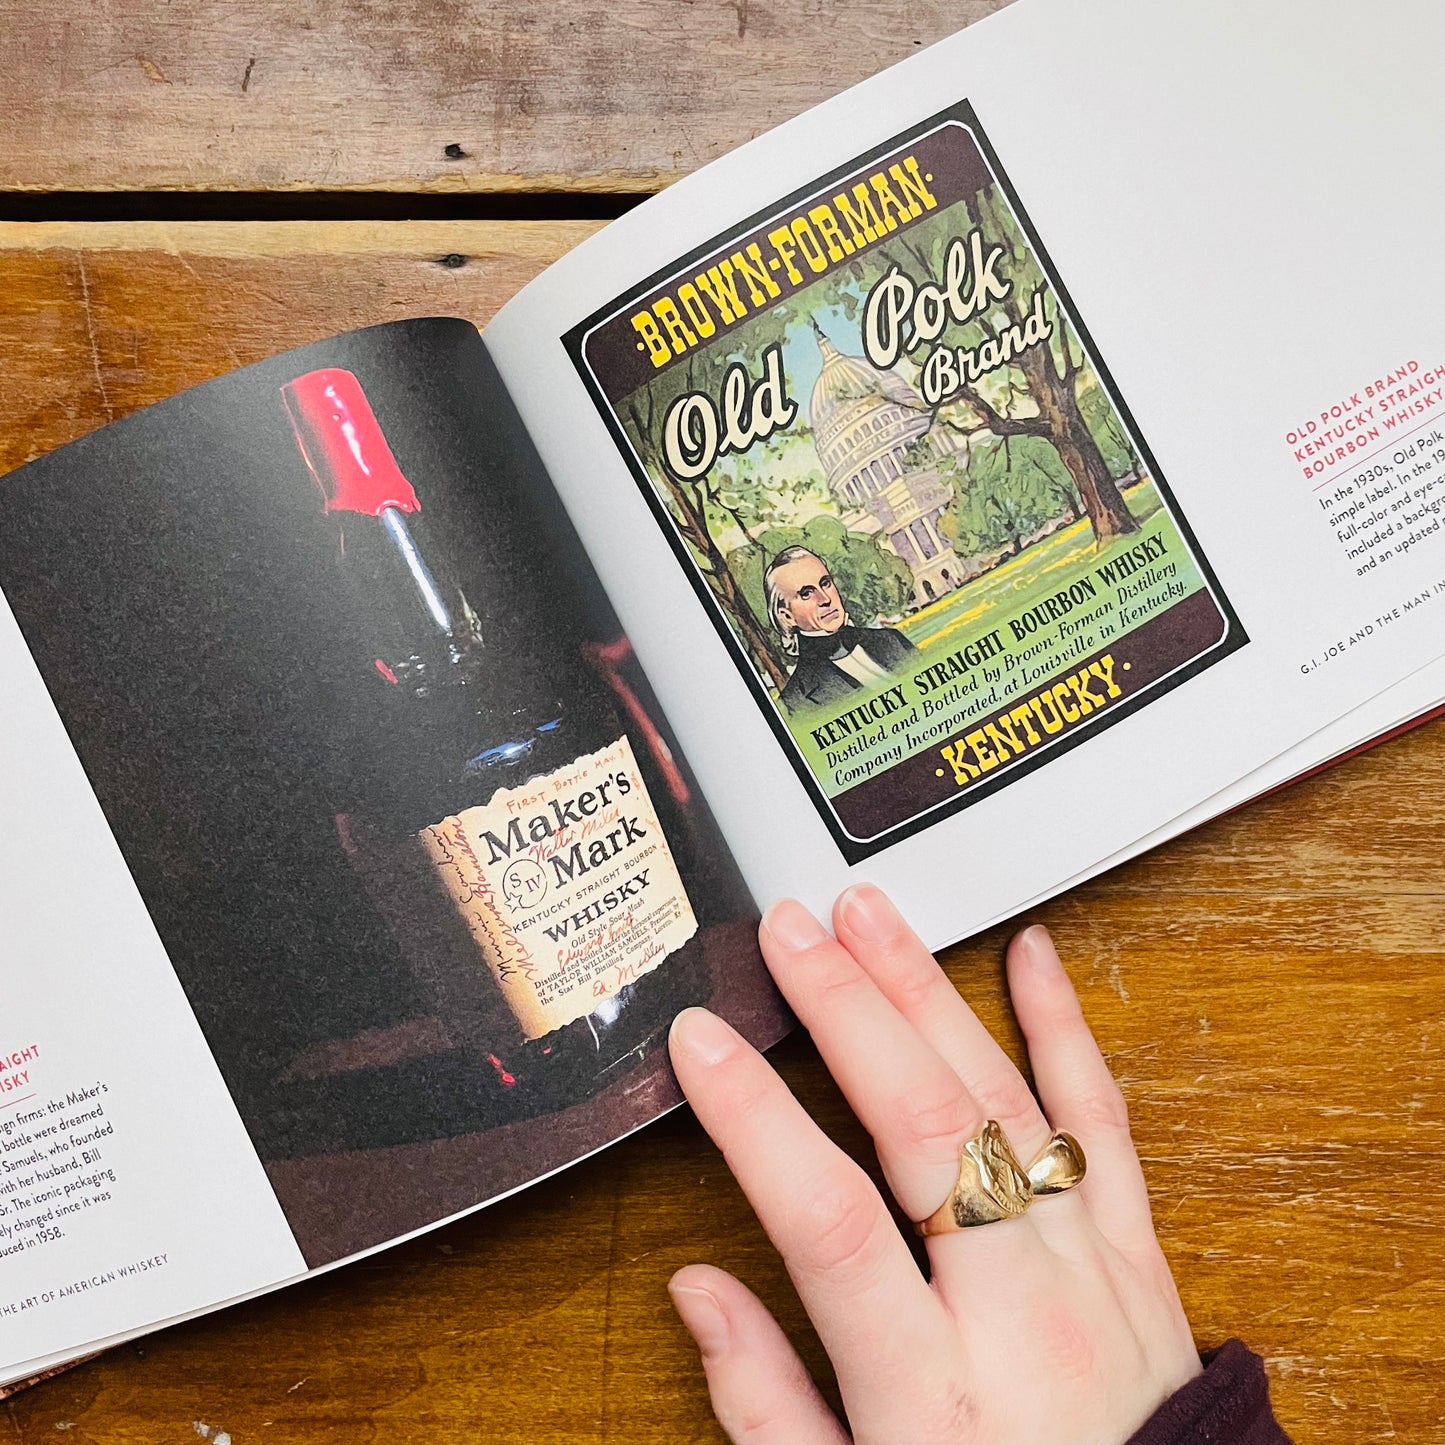 The Art of American Whiskey